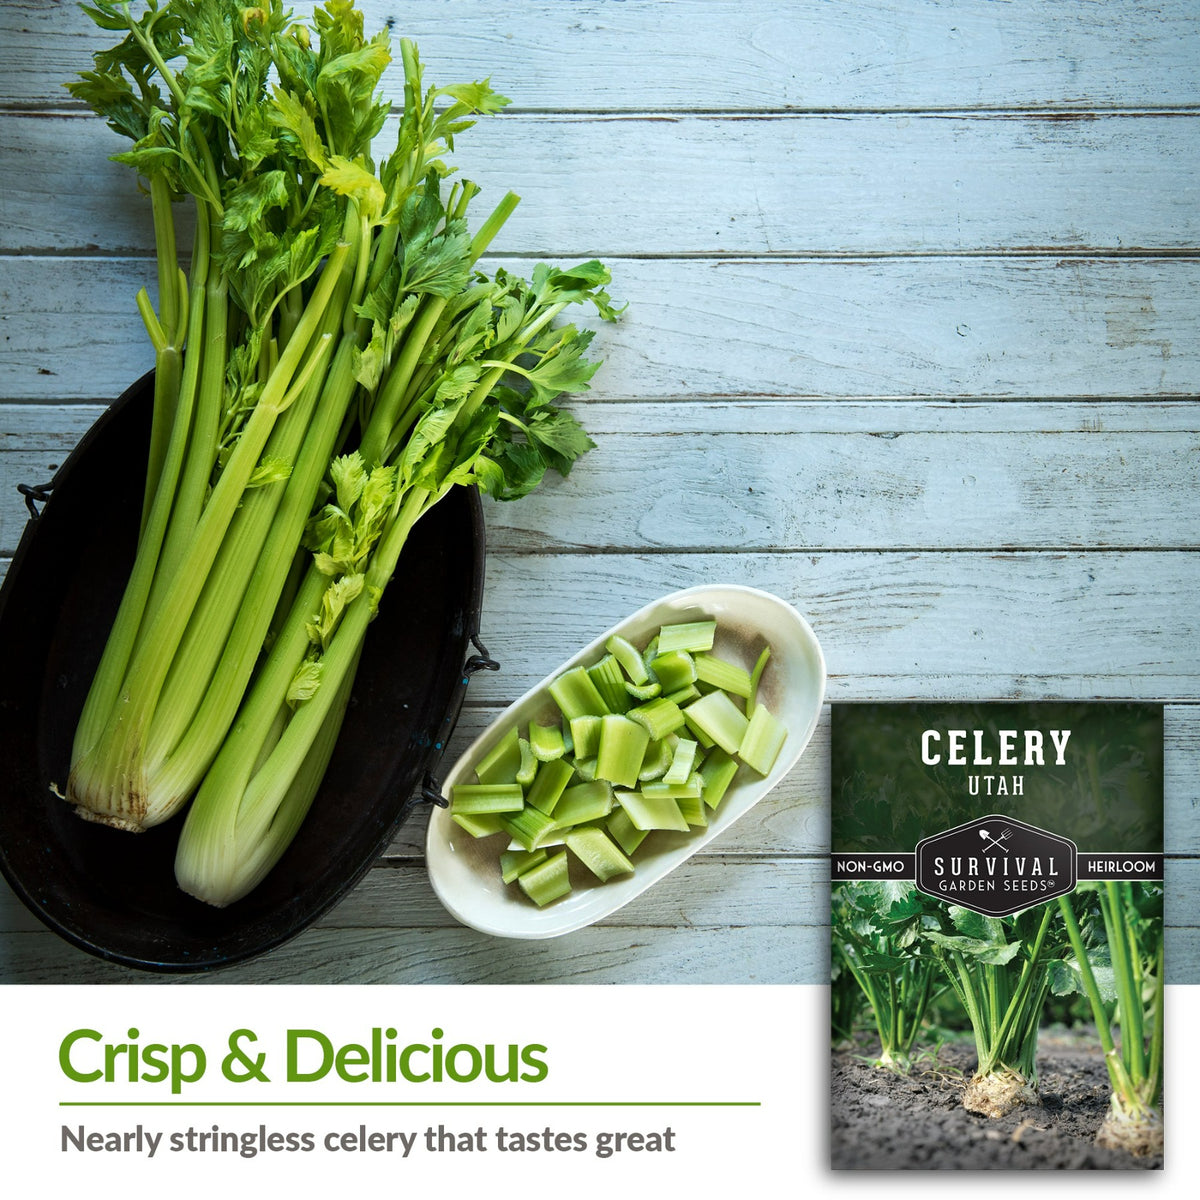 Utah celery is nearly stringless, crisp and delicious